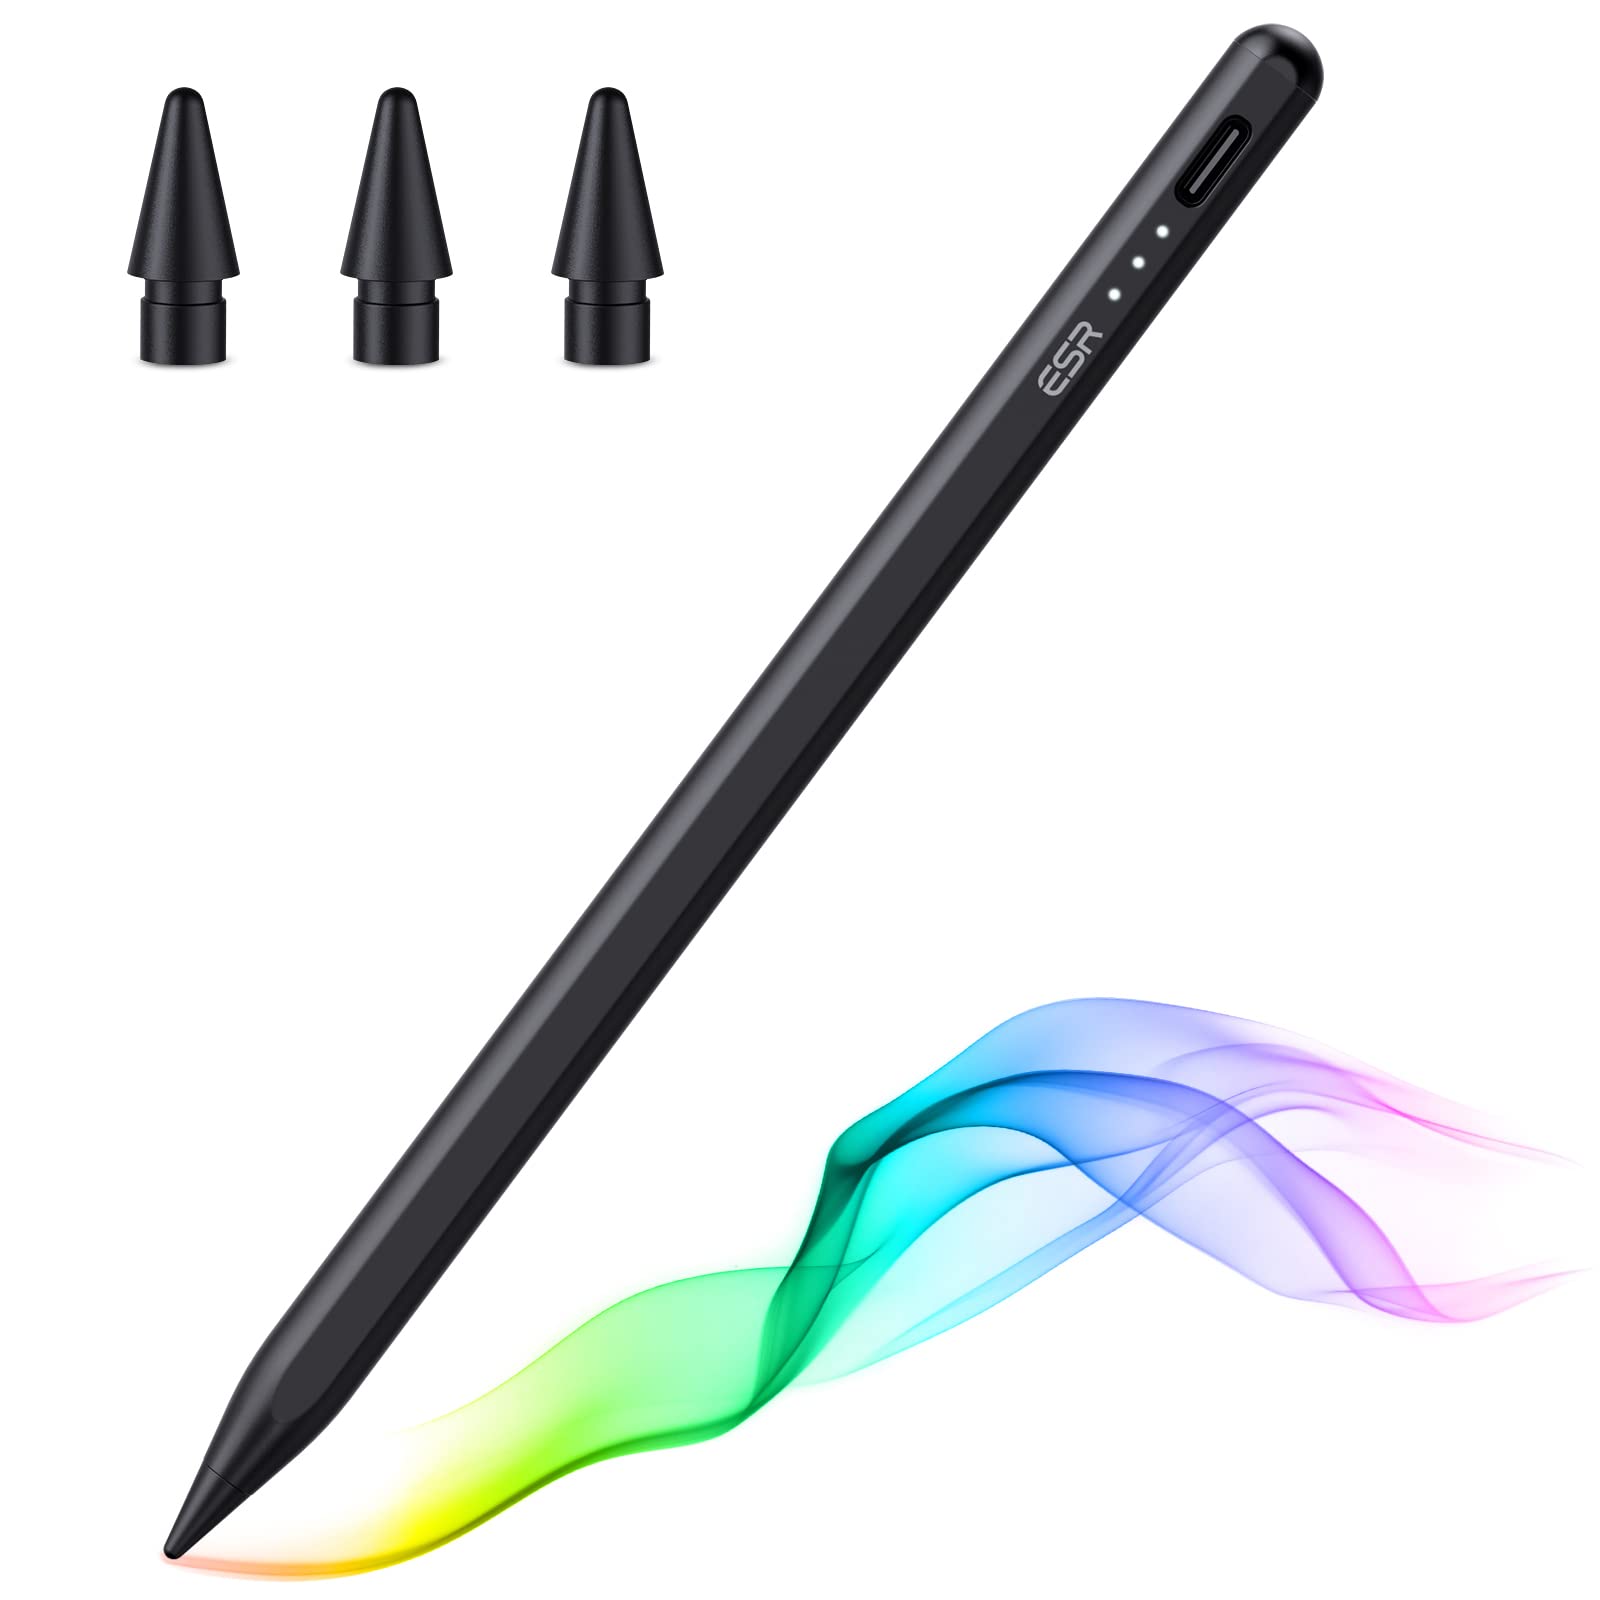 ESR Stylus Pen for iPad w/ Magnetic Attachment, Tilt Sensitivity, & Palm Rejection $15.47 + Free Shipping w/ Prime or on Orders $35+ $15.49